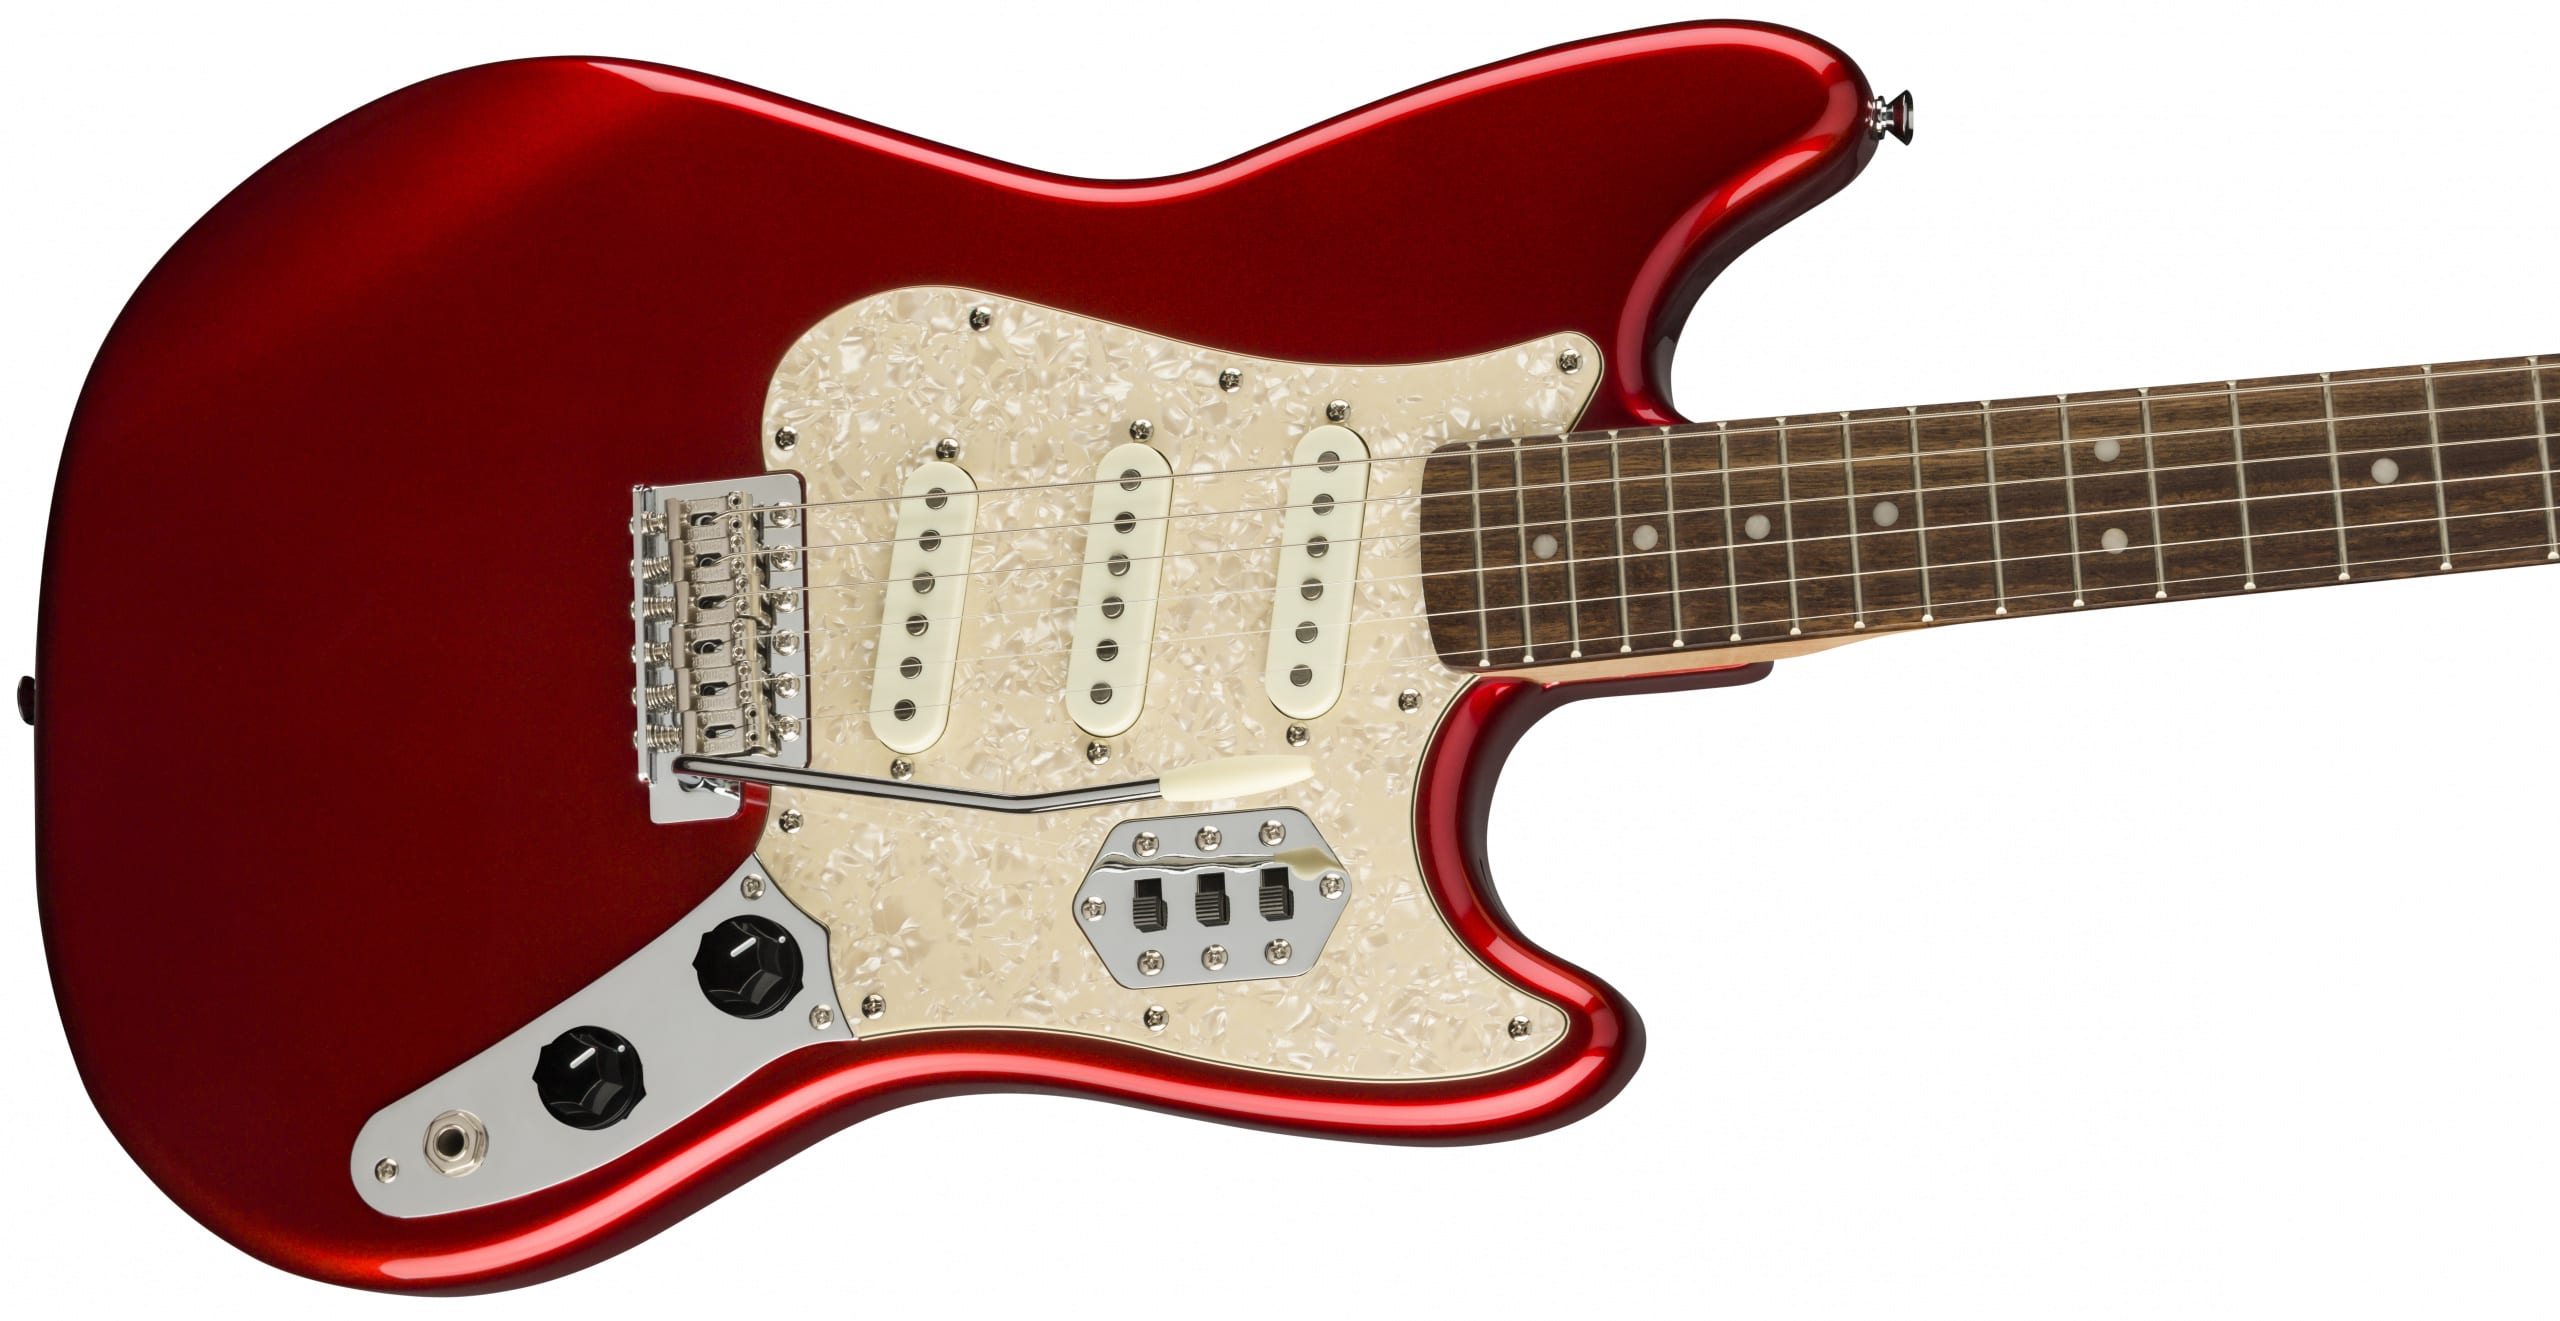 Squier Paranormal Range Cyclone in Candy Apple Red